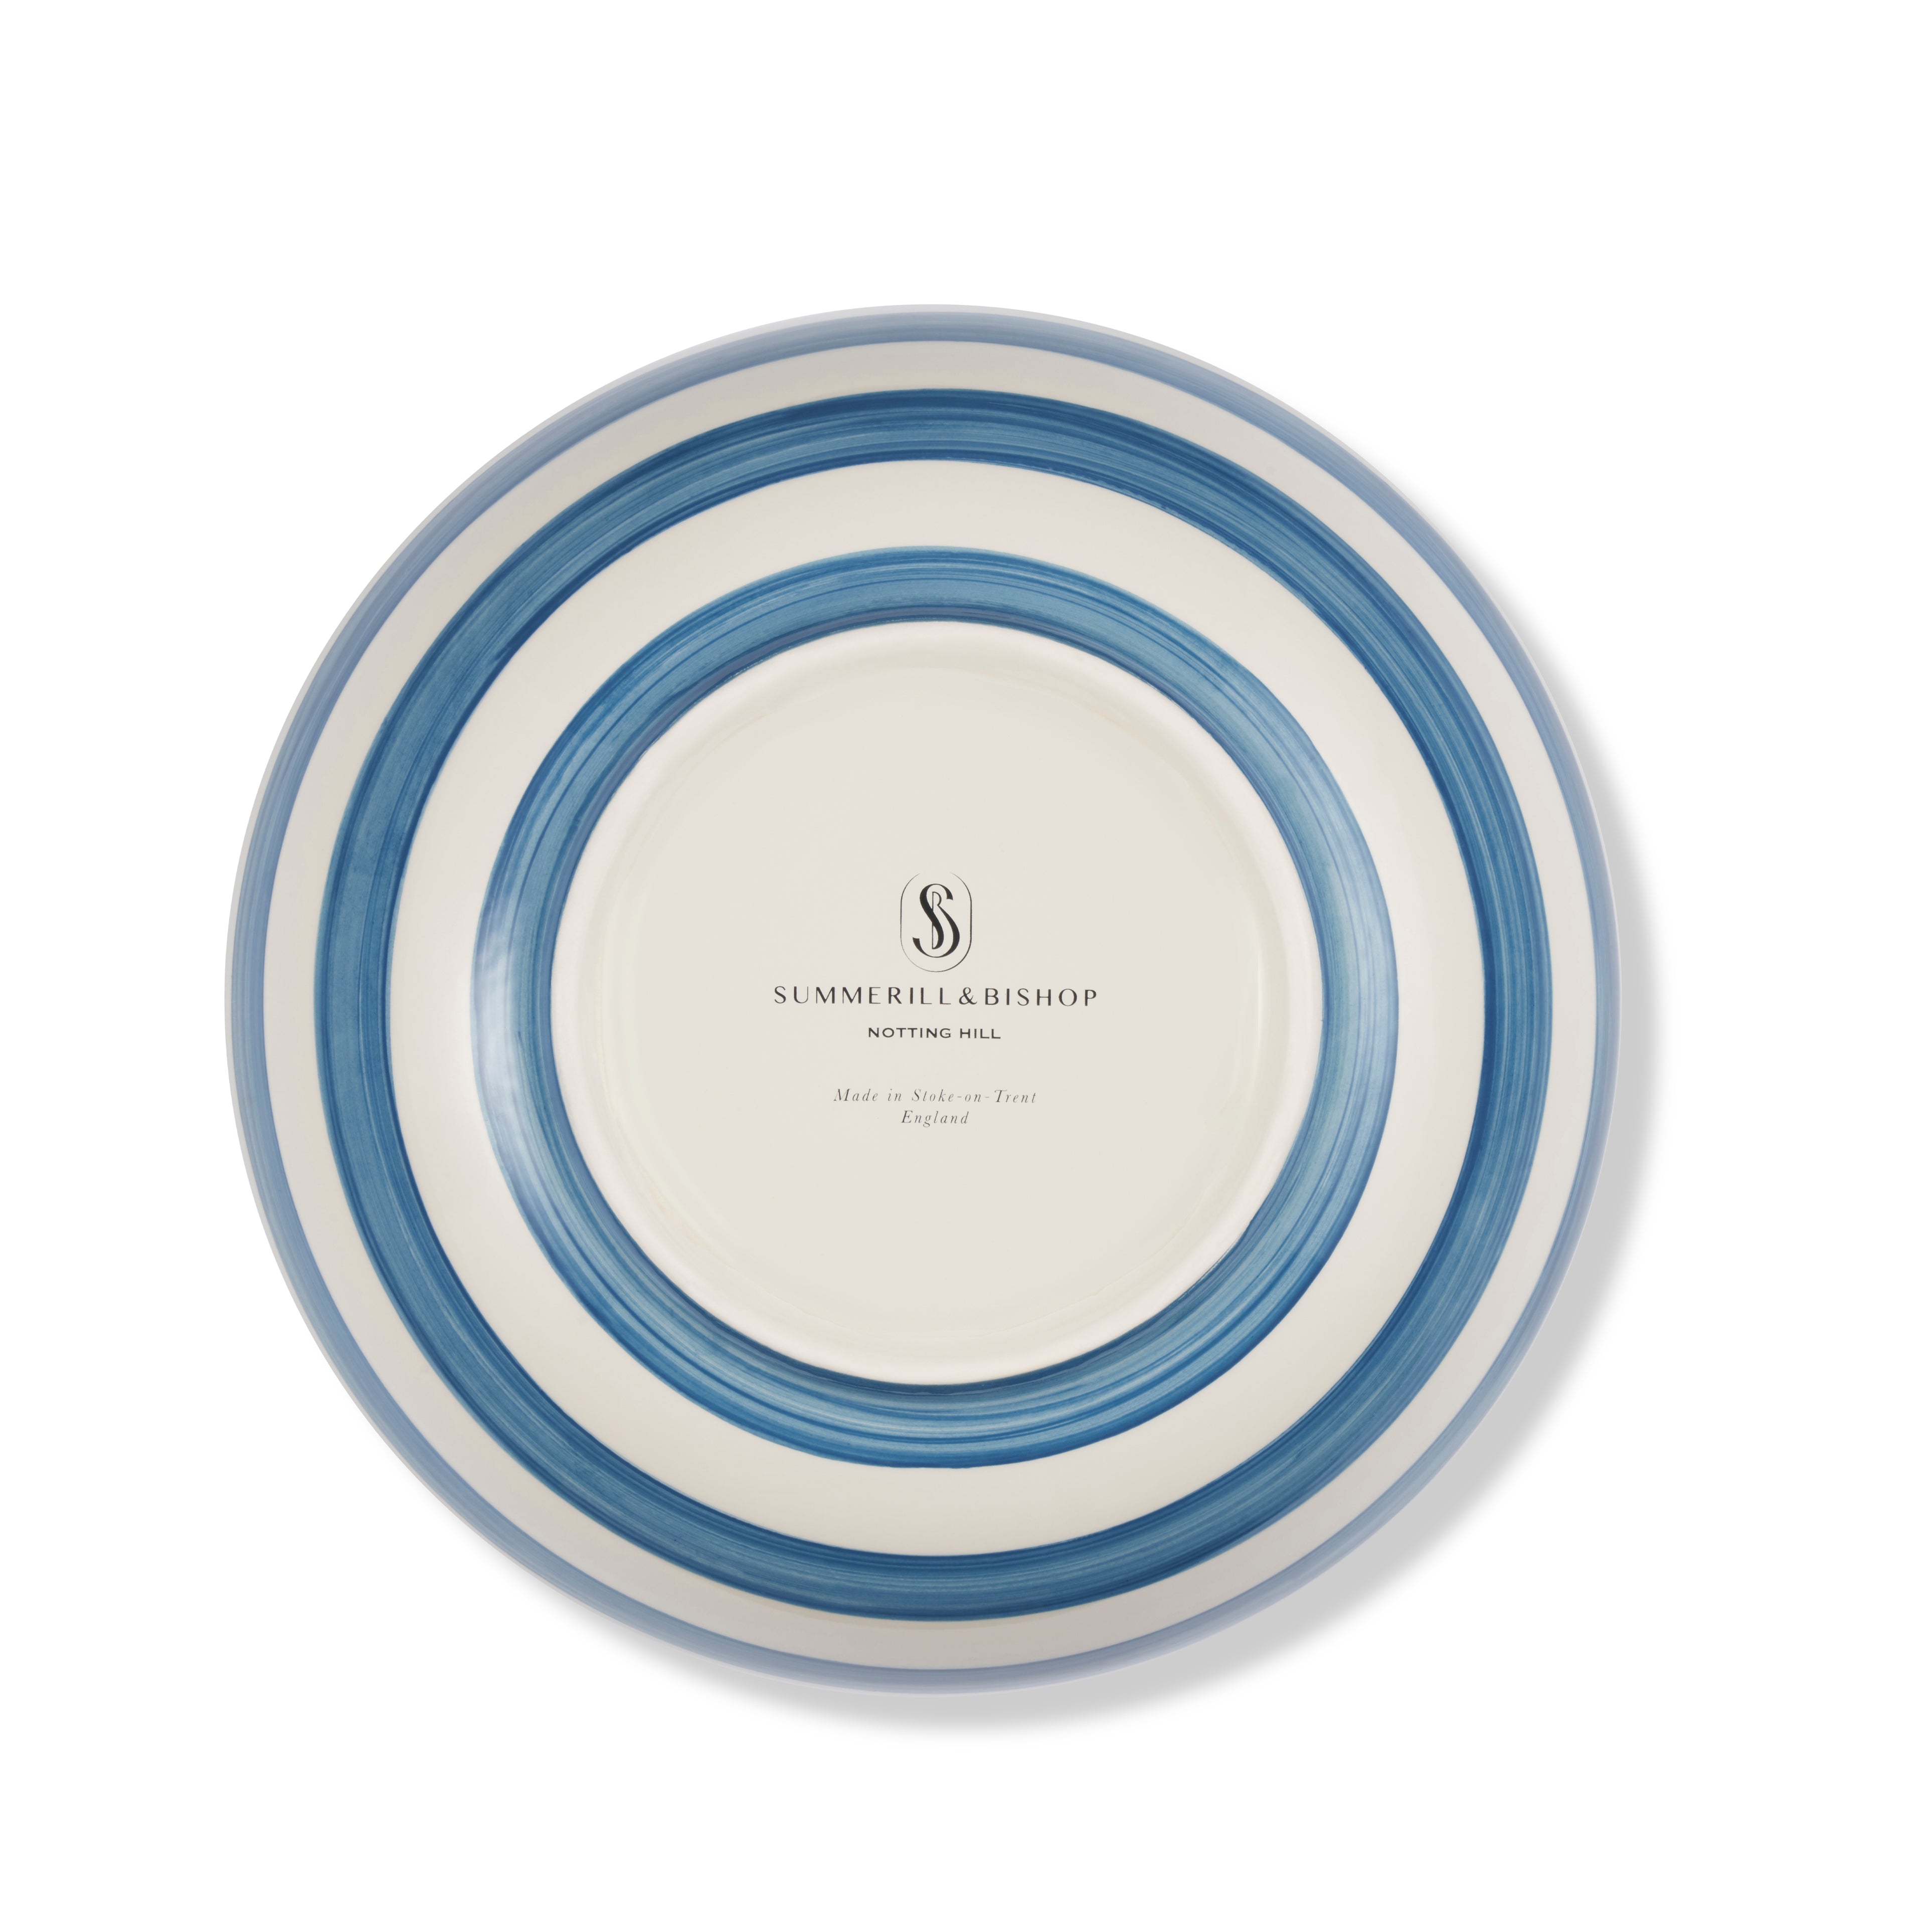 S&B Classic Stripe Serving Bowl in Blue and White